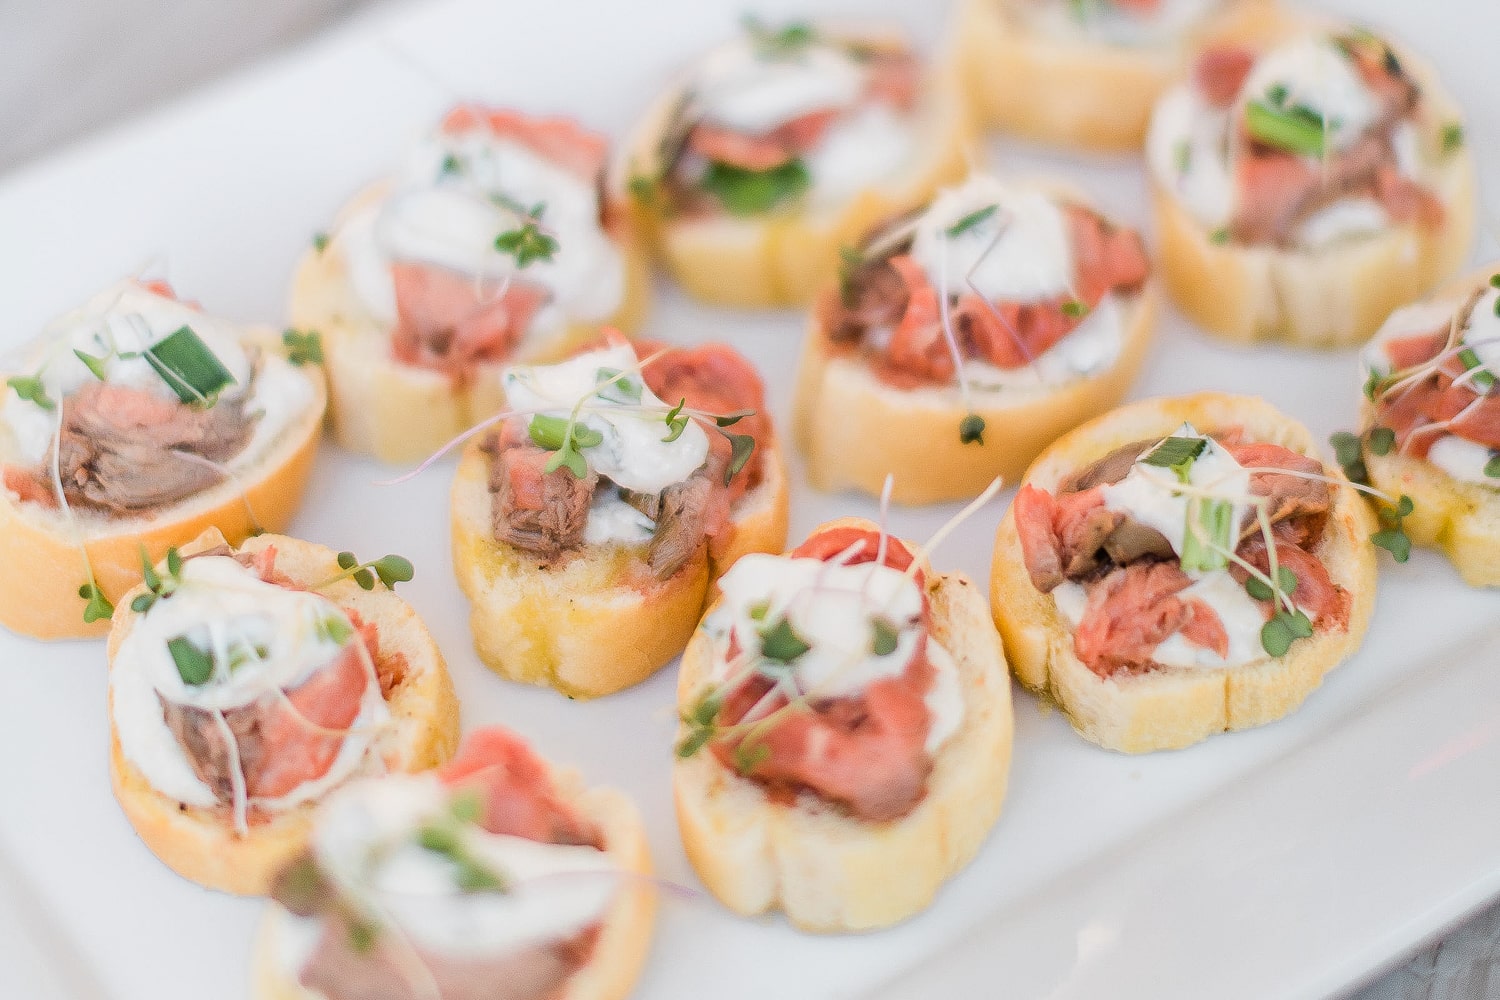 Blogger Stephanie Ziajka shares one of the best beef tenderloin crostini recipes on Diary of a Debutante